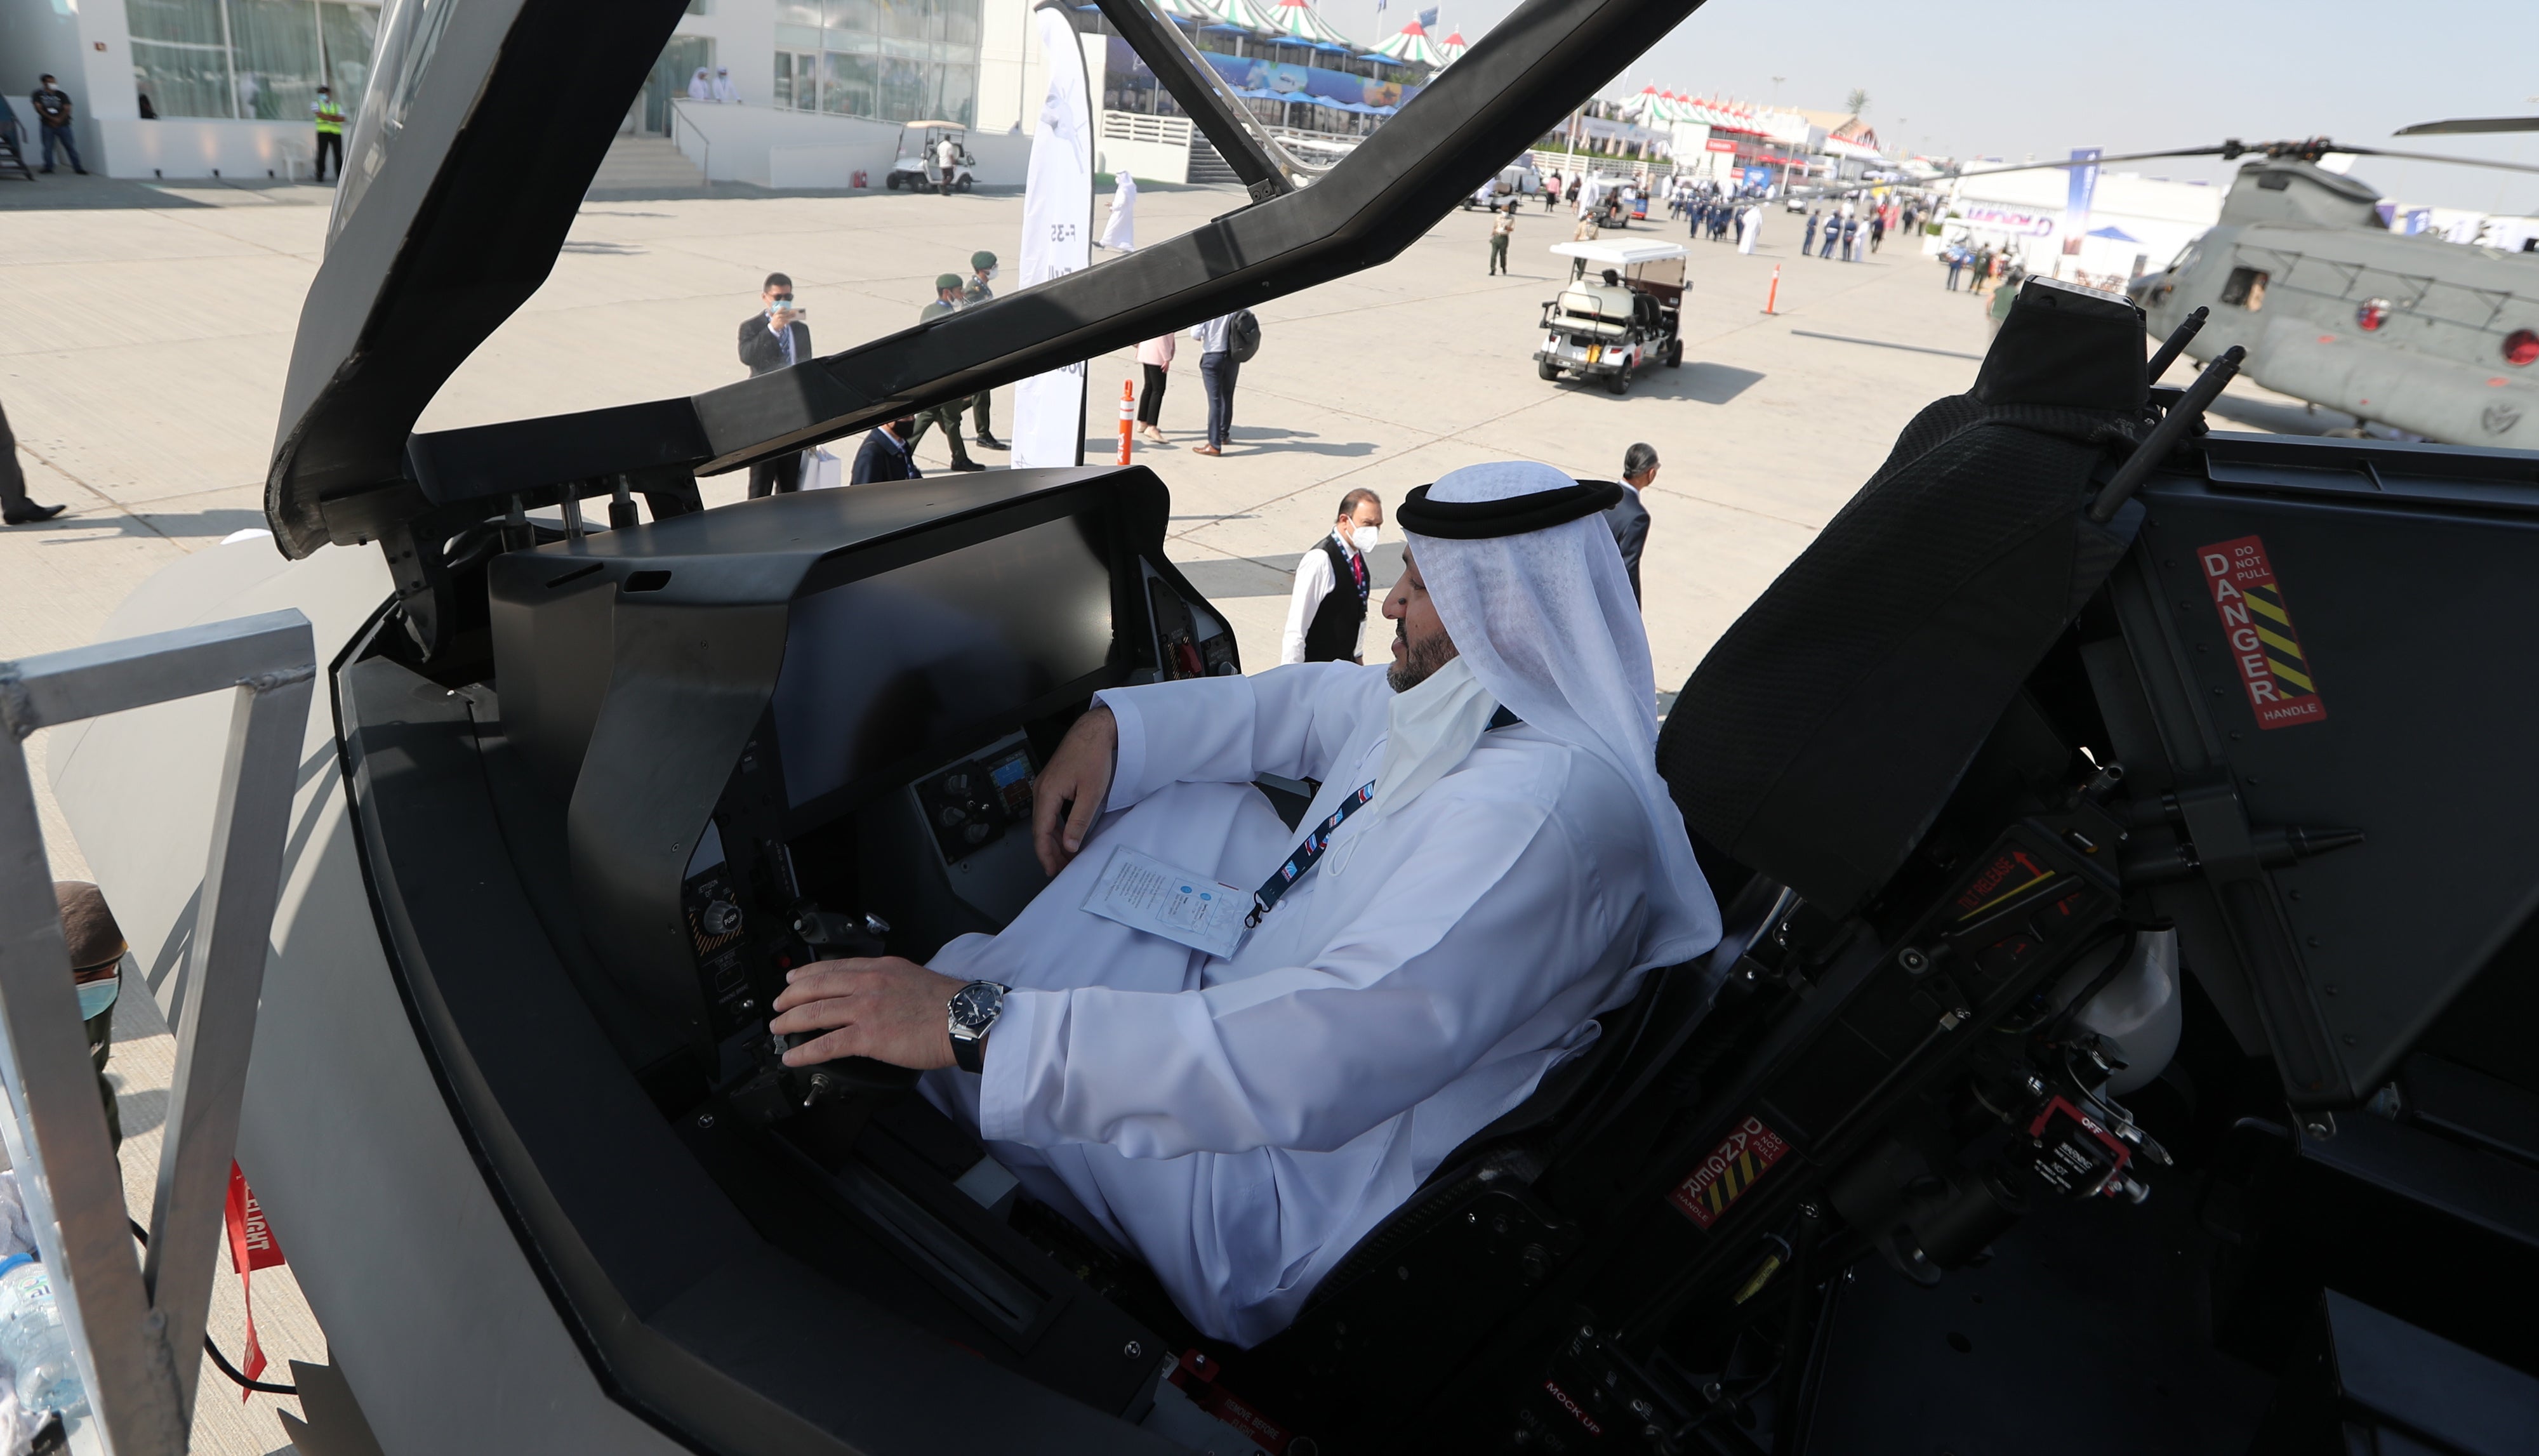 An Emirati inspects the US F-35 during the exhibition of the Dubai Airshow 2021